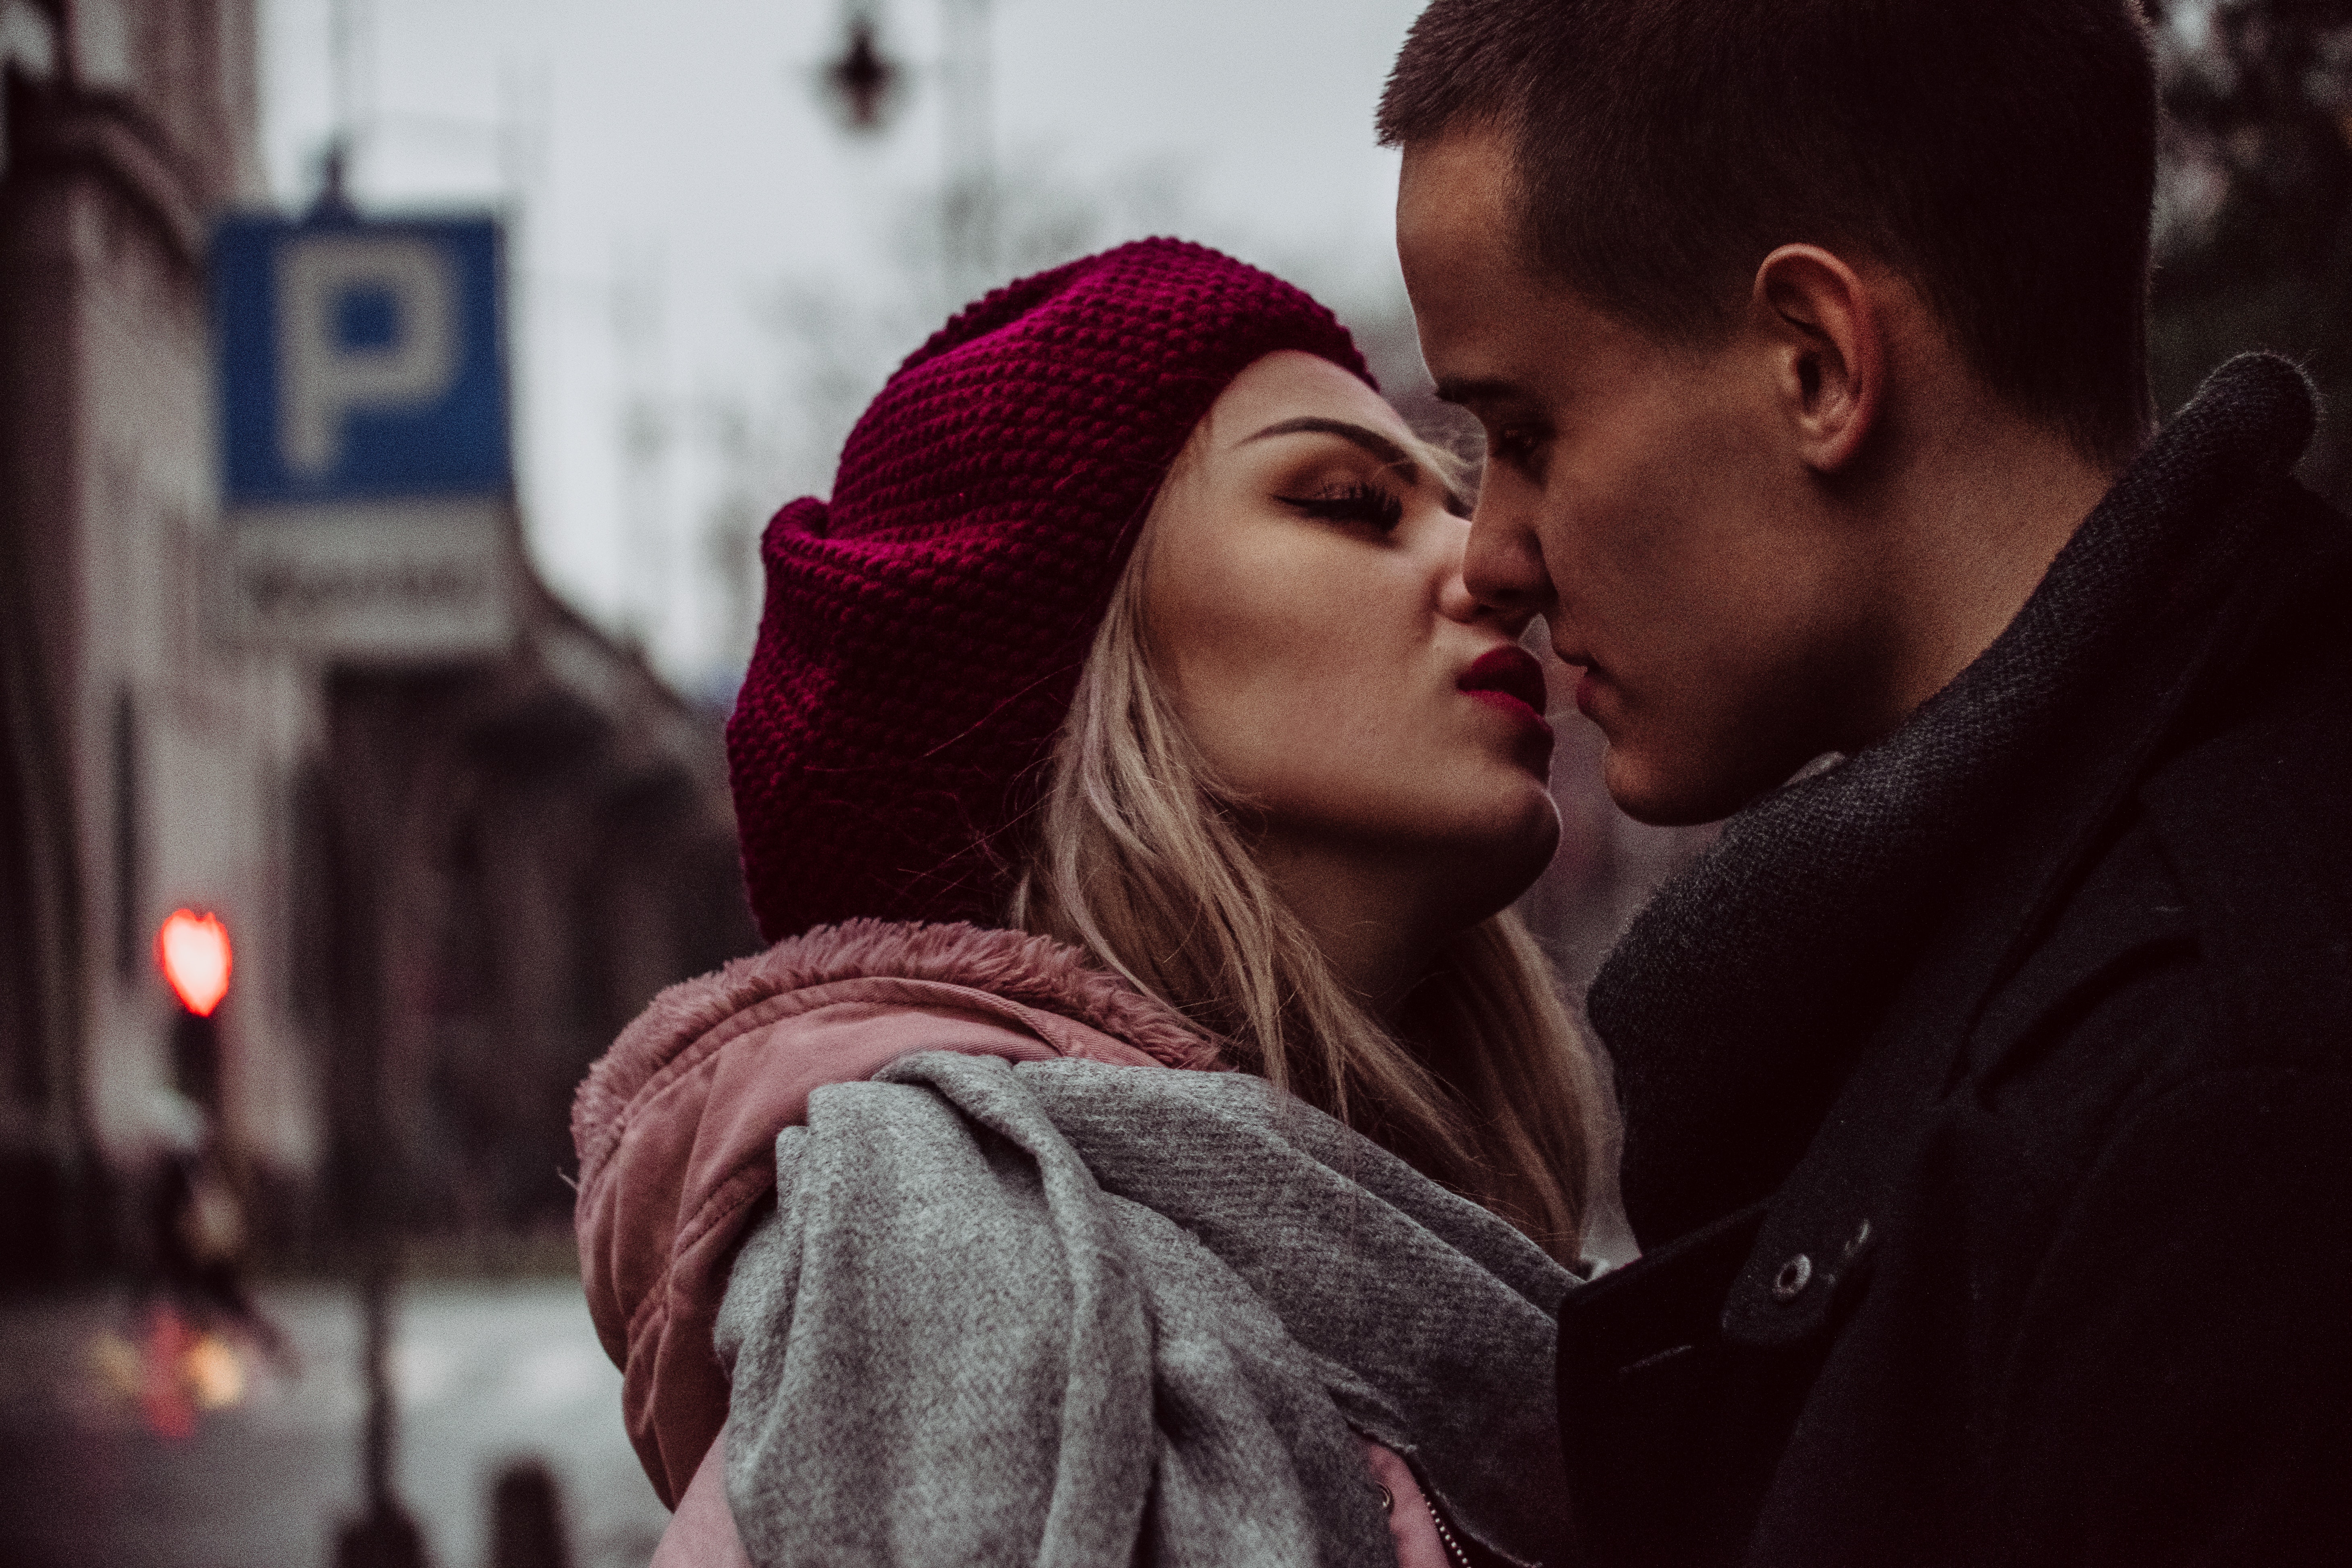 Close Up Photograph of Woman Kissing Man, Adult, People, Winter, Wear, HQ Photo